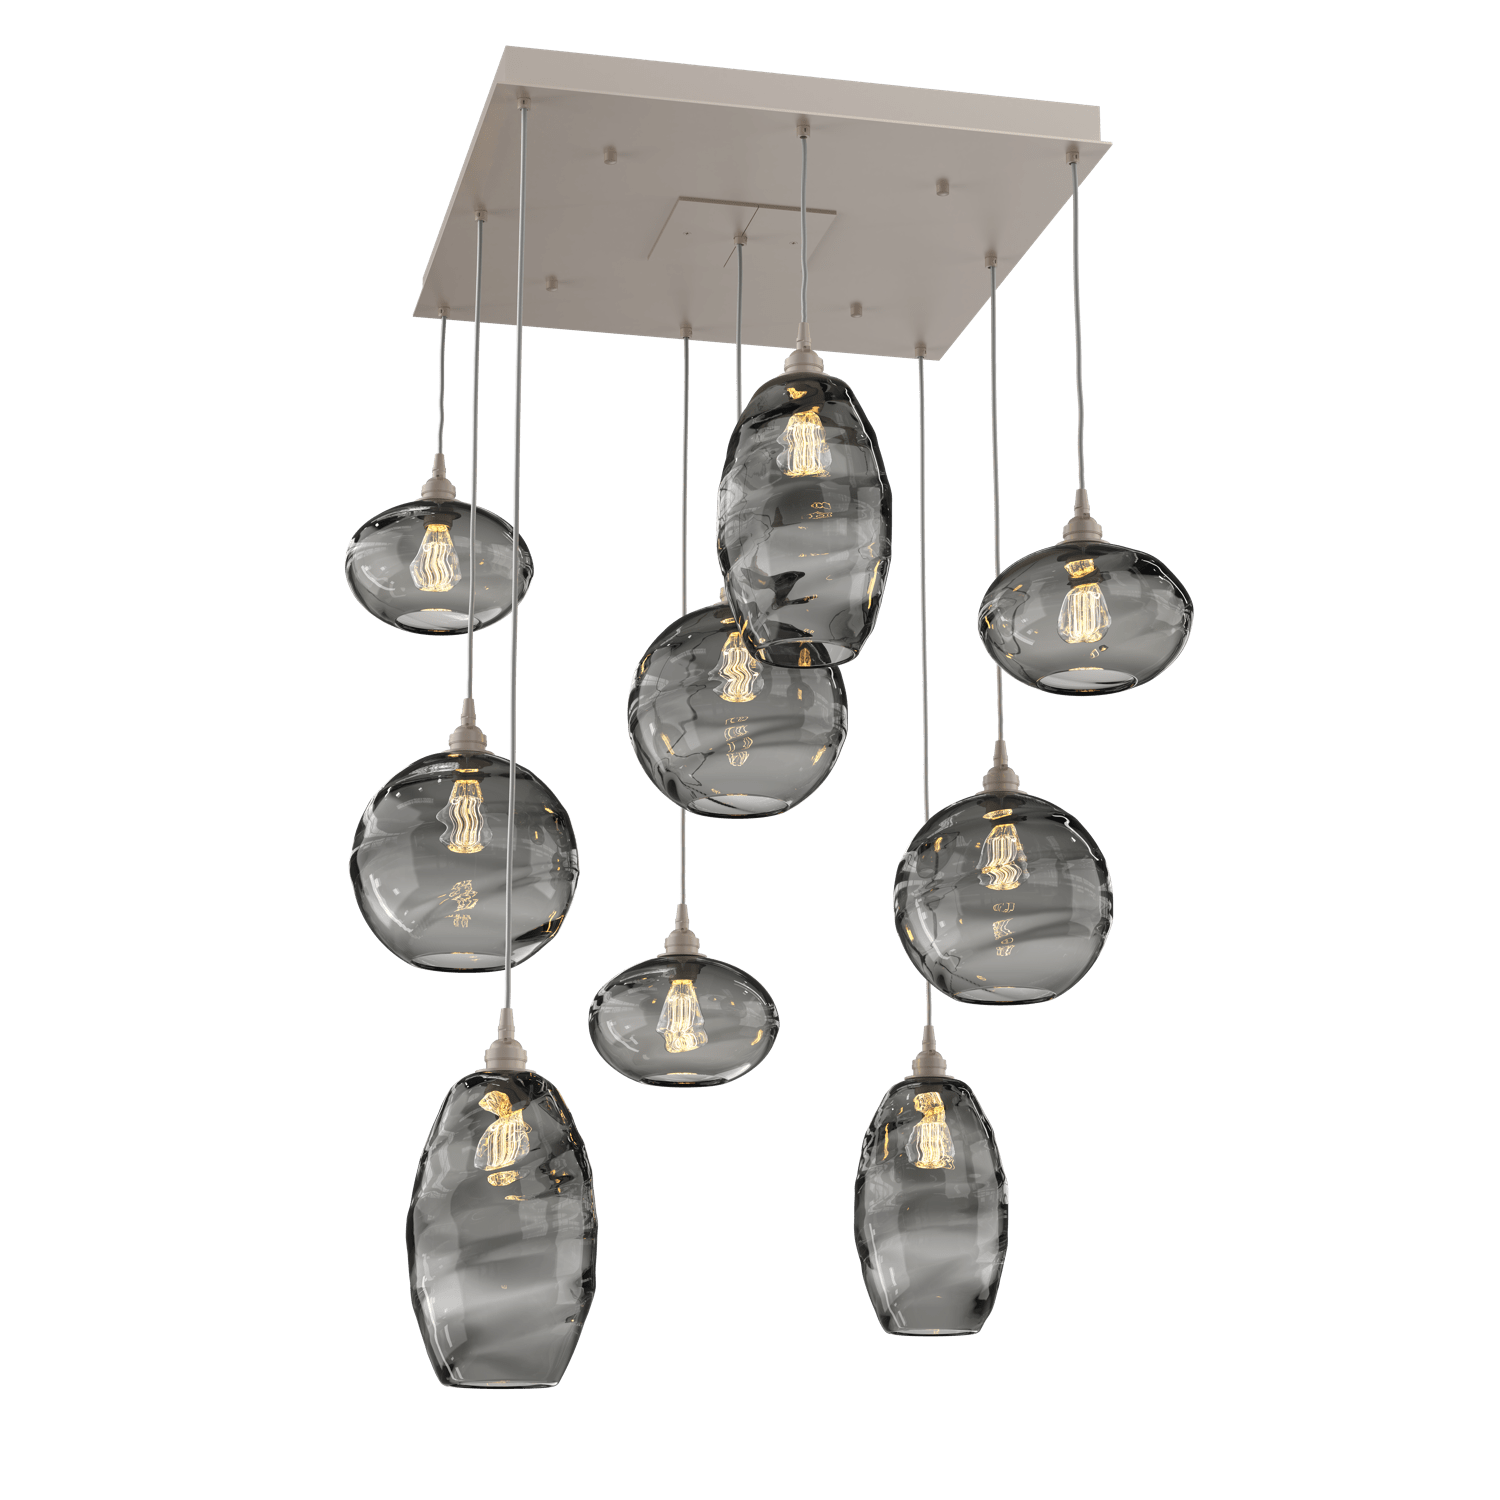 CHB0048-09-BS-OS-Hammerton-Studio-Optic-Blown-Glass-Misto-9-light-square-pendant-chandelier-with-metallic-beige-silver-finish-and-optic-smoke-blown-glass-shades-and-incandescent-lamping